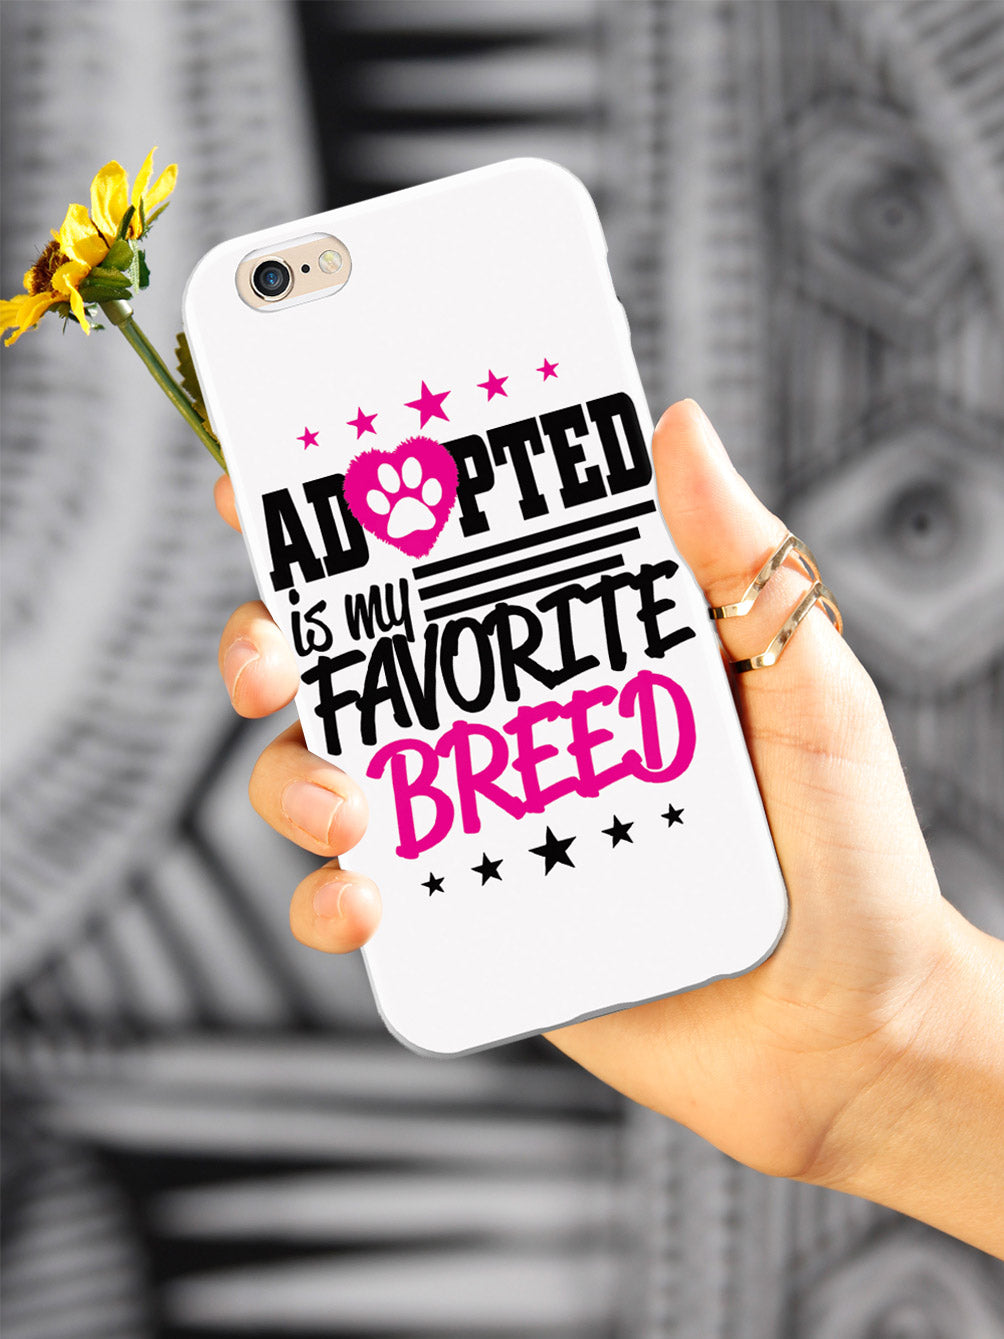 My Favorite Breed is Adopted - White Case